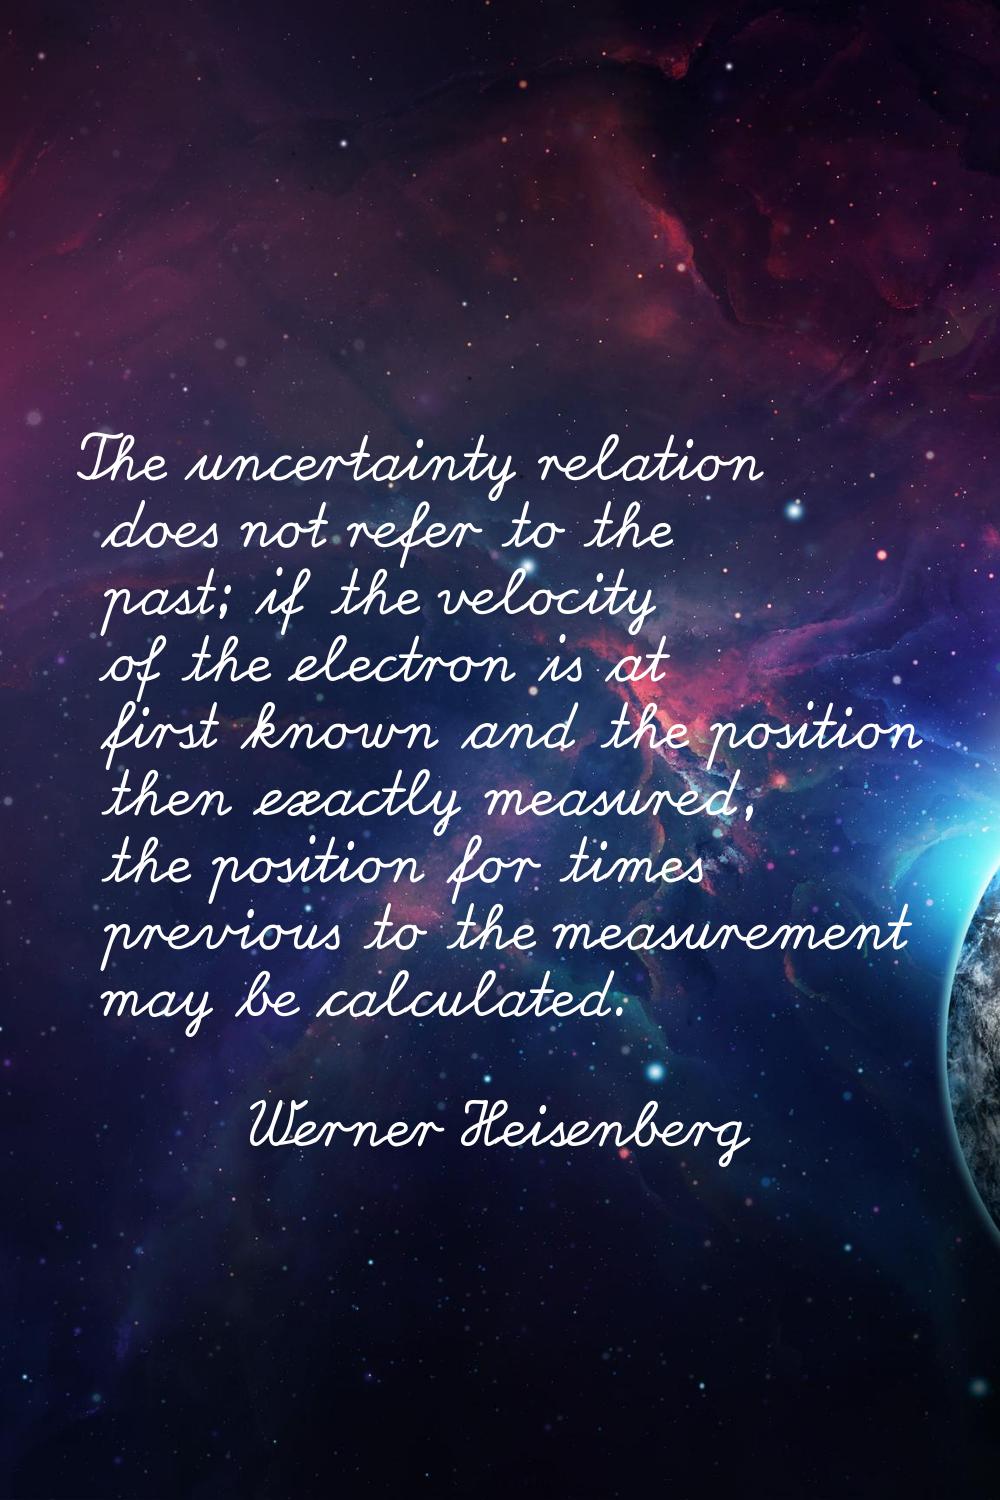 The uncertainty relation does not refer to the past; if the velocity of the electron is at first kn